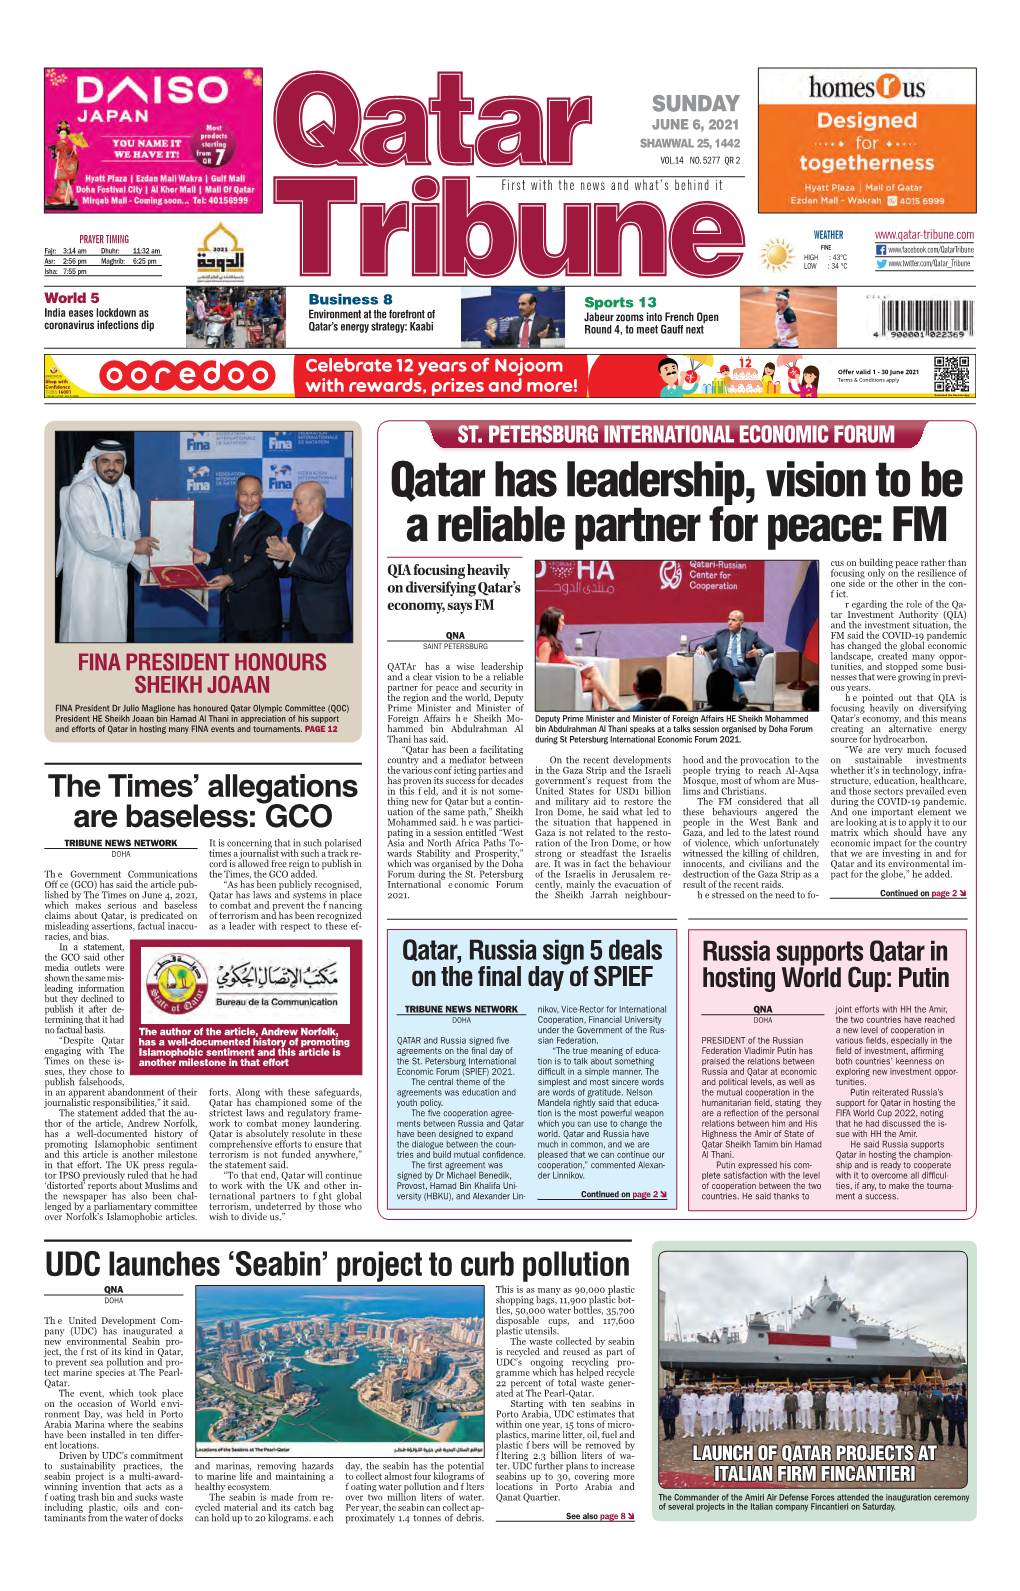 Qatar Has Leadership, Vision to Be a Reliable Partner For